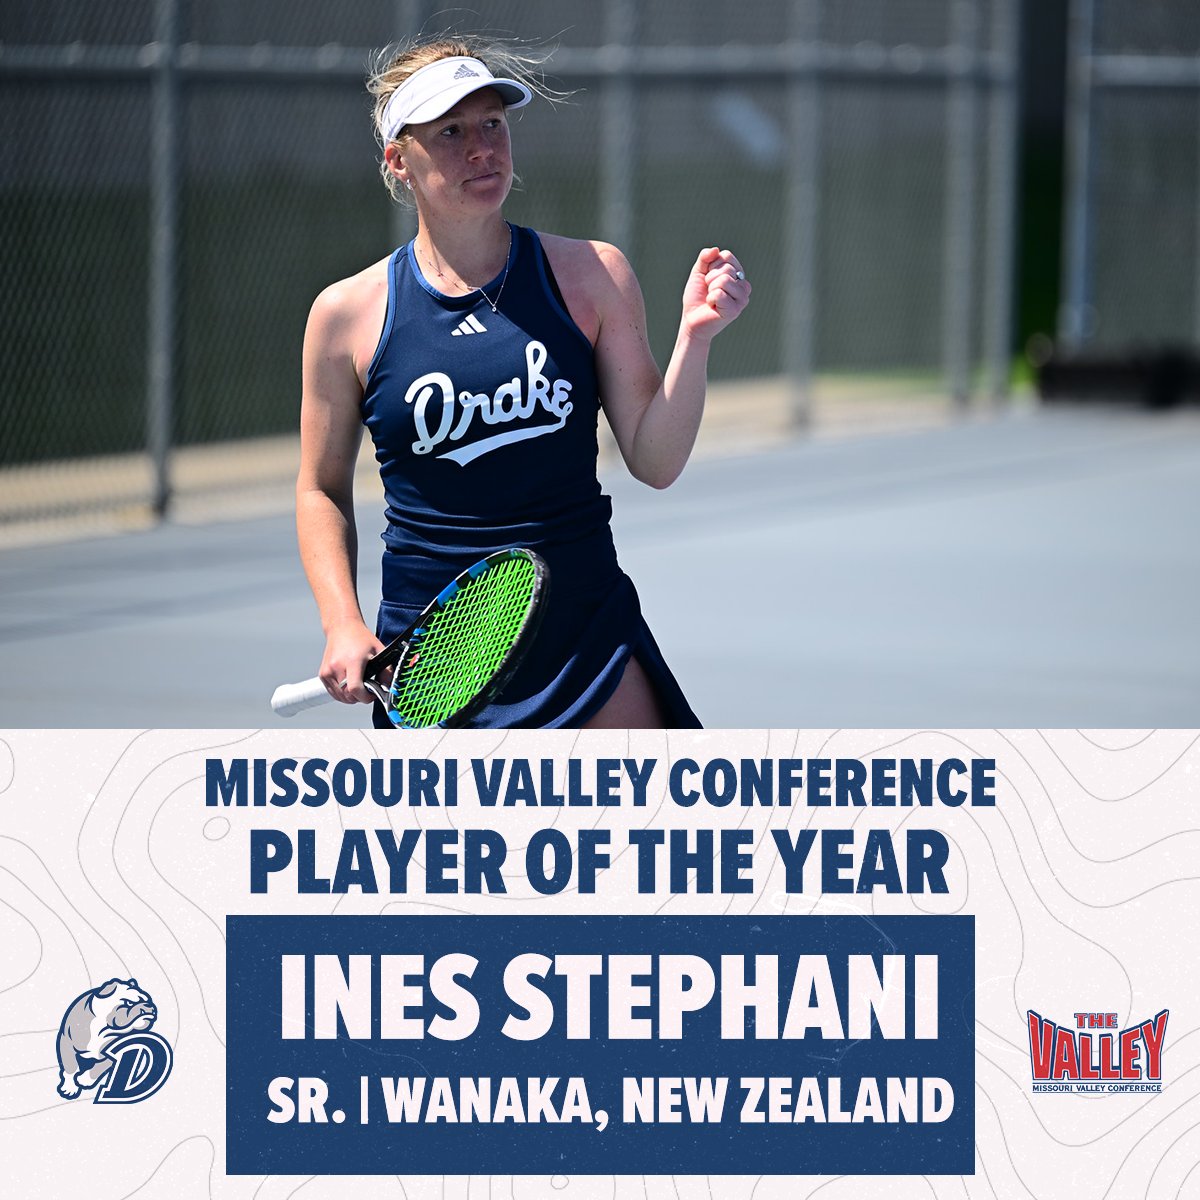 𝐏𝐥𝐚𝐲𝐞𝐫 𝐨𝐟 𝐭𝐡𝐞 𝐘𝐞𝐚𝐫 !!

Ines Stephani repeated as MVC Player of the Year ahead of the conference tournament in St. Louis. Congratulations Ines!
 
🎾📰➡️ shorturl.at/rEGR3

#DSMHometownTeam